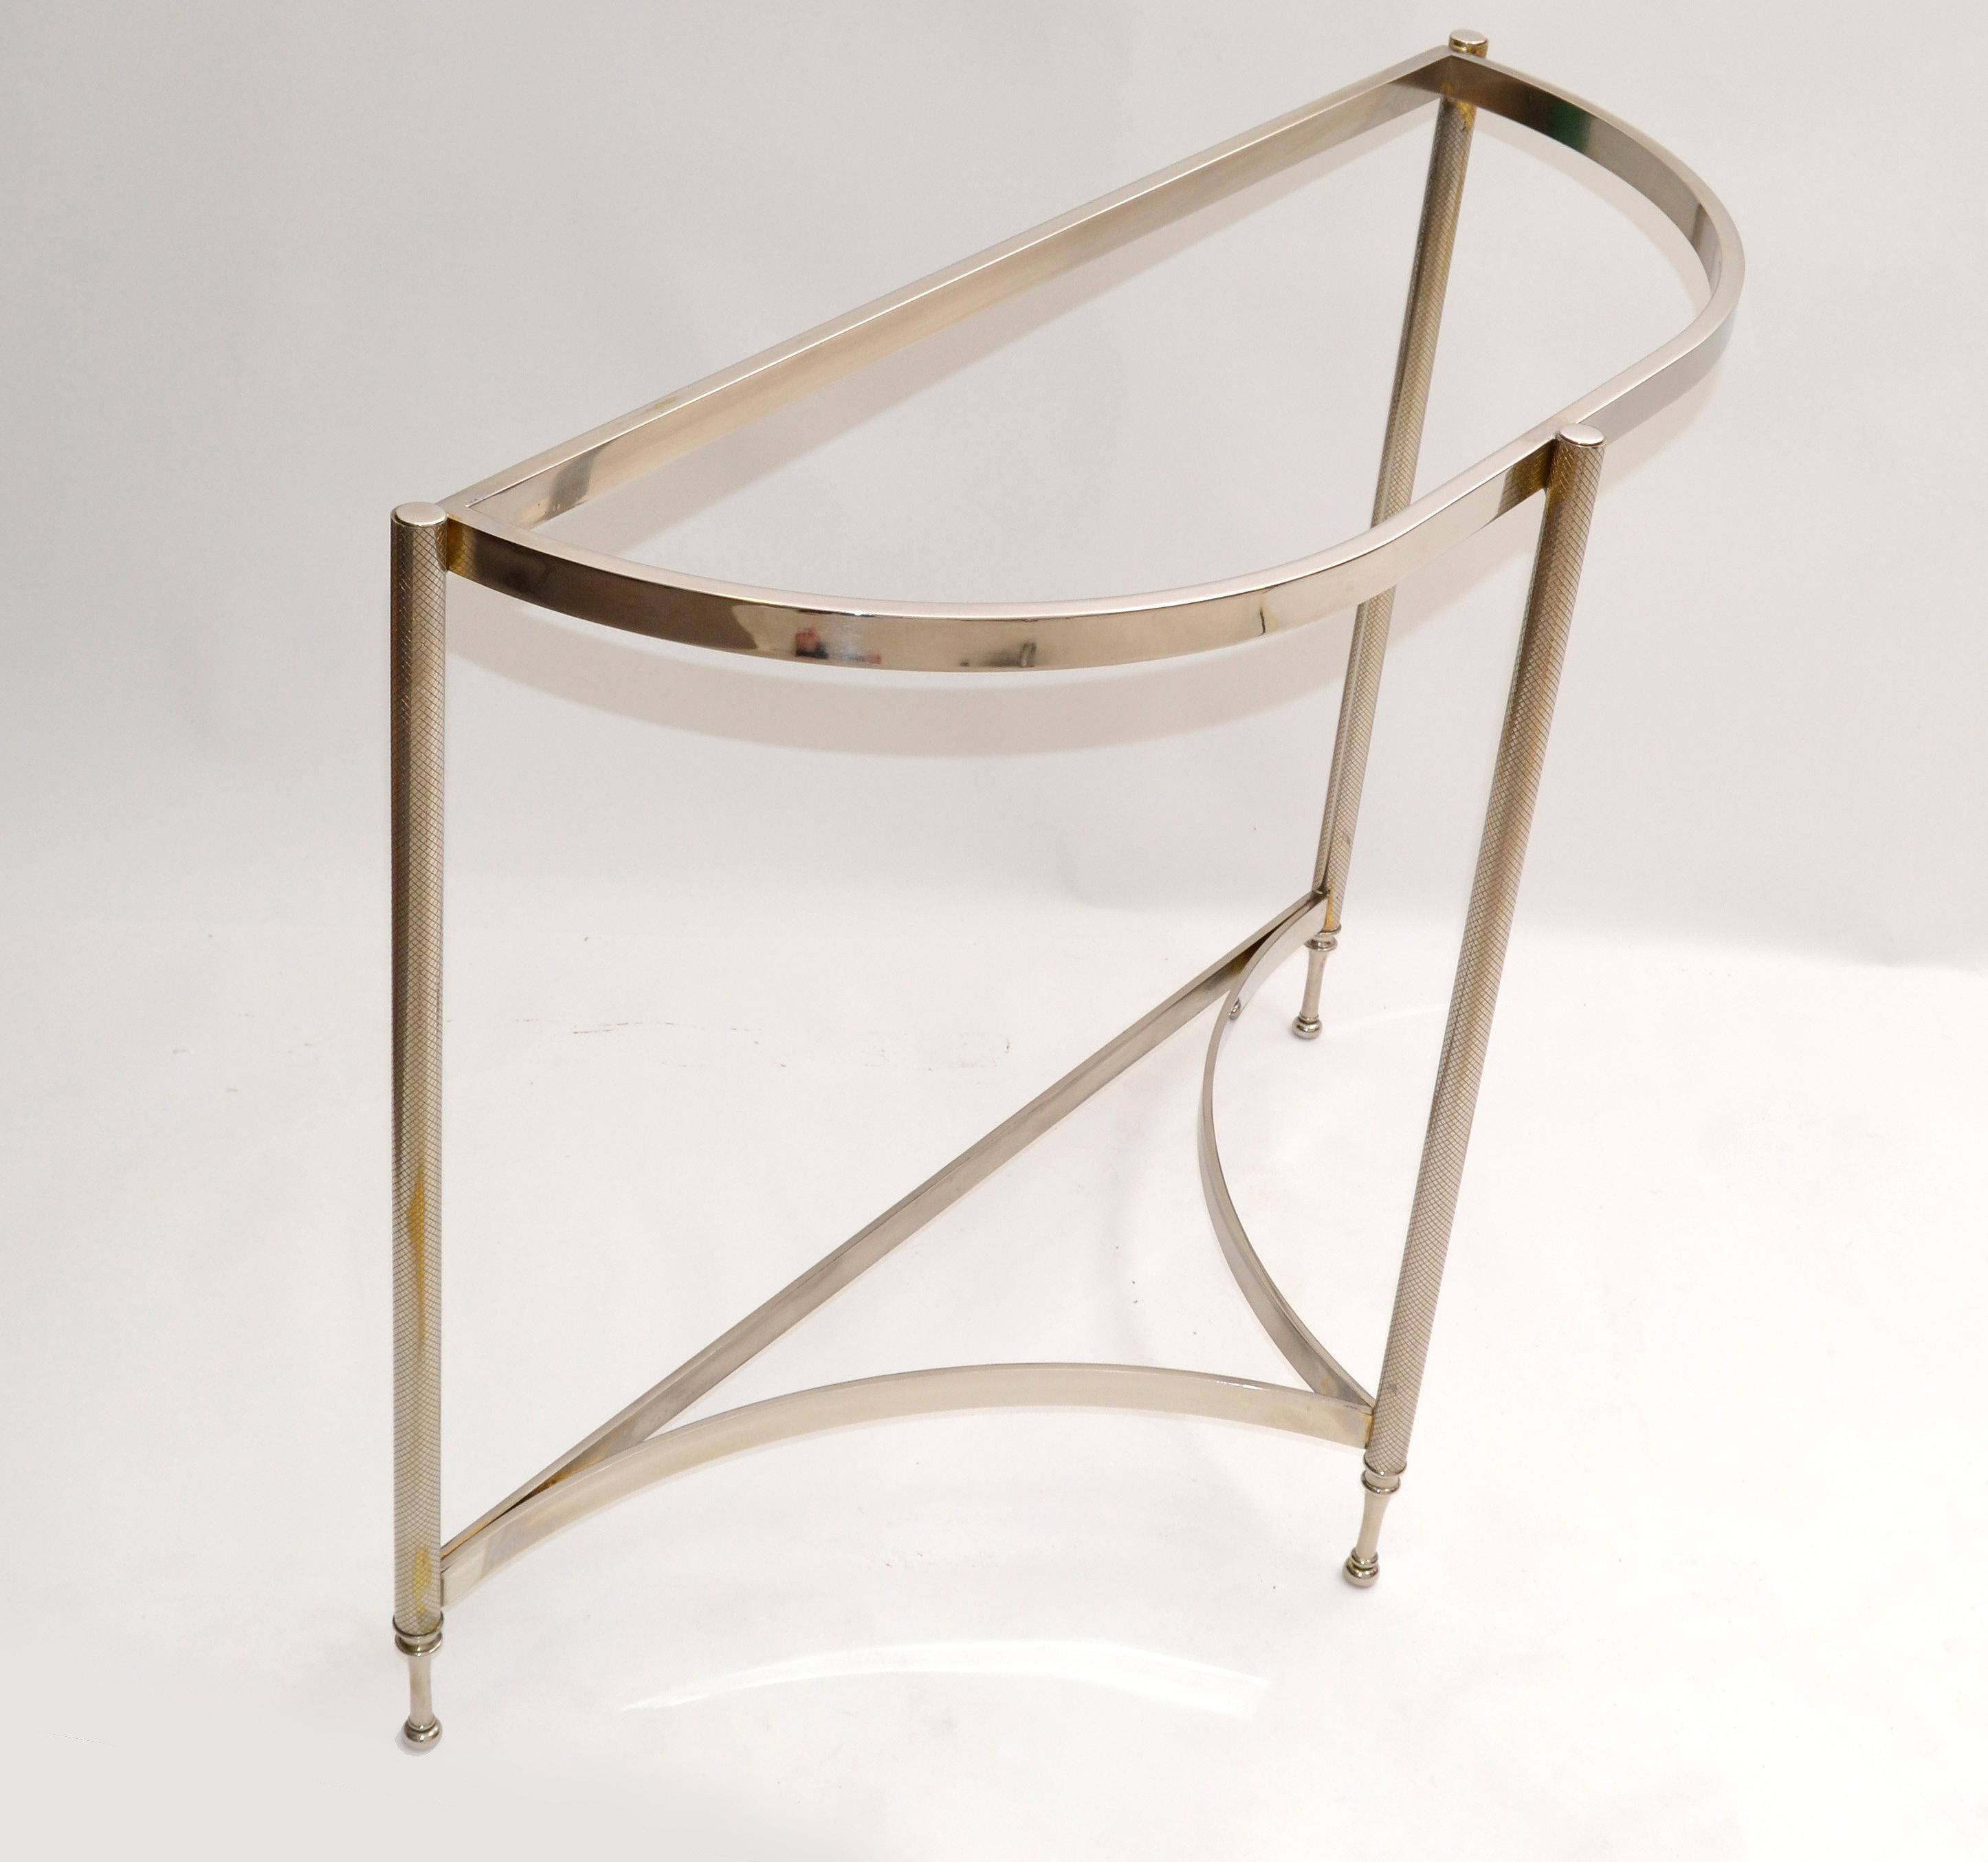 Hollywood Regency Demilune chrome console table, hallway table.
No glass top.
  